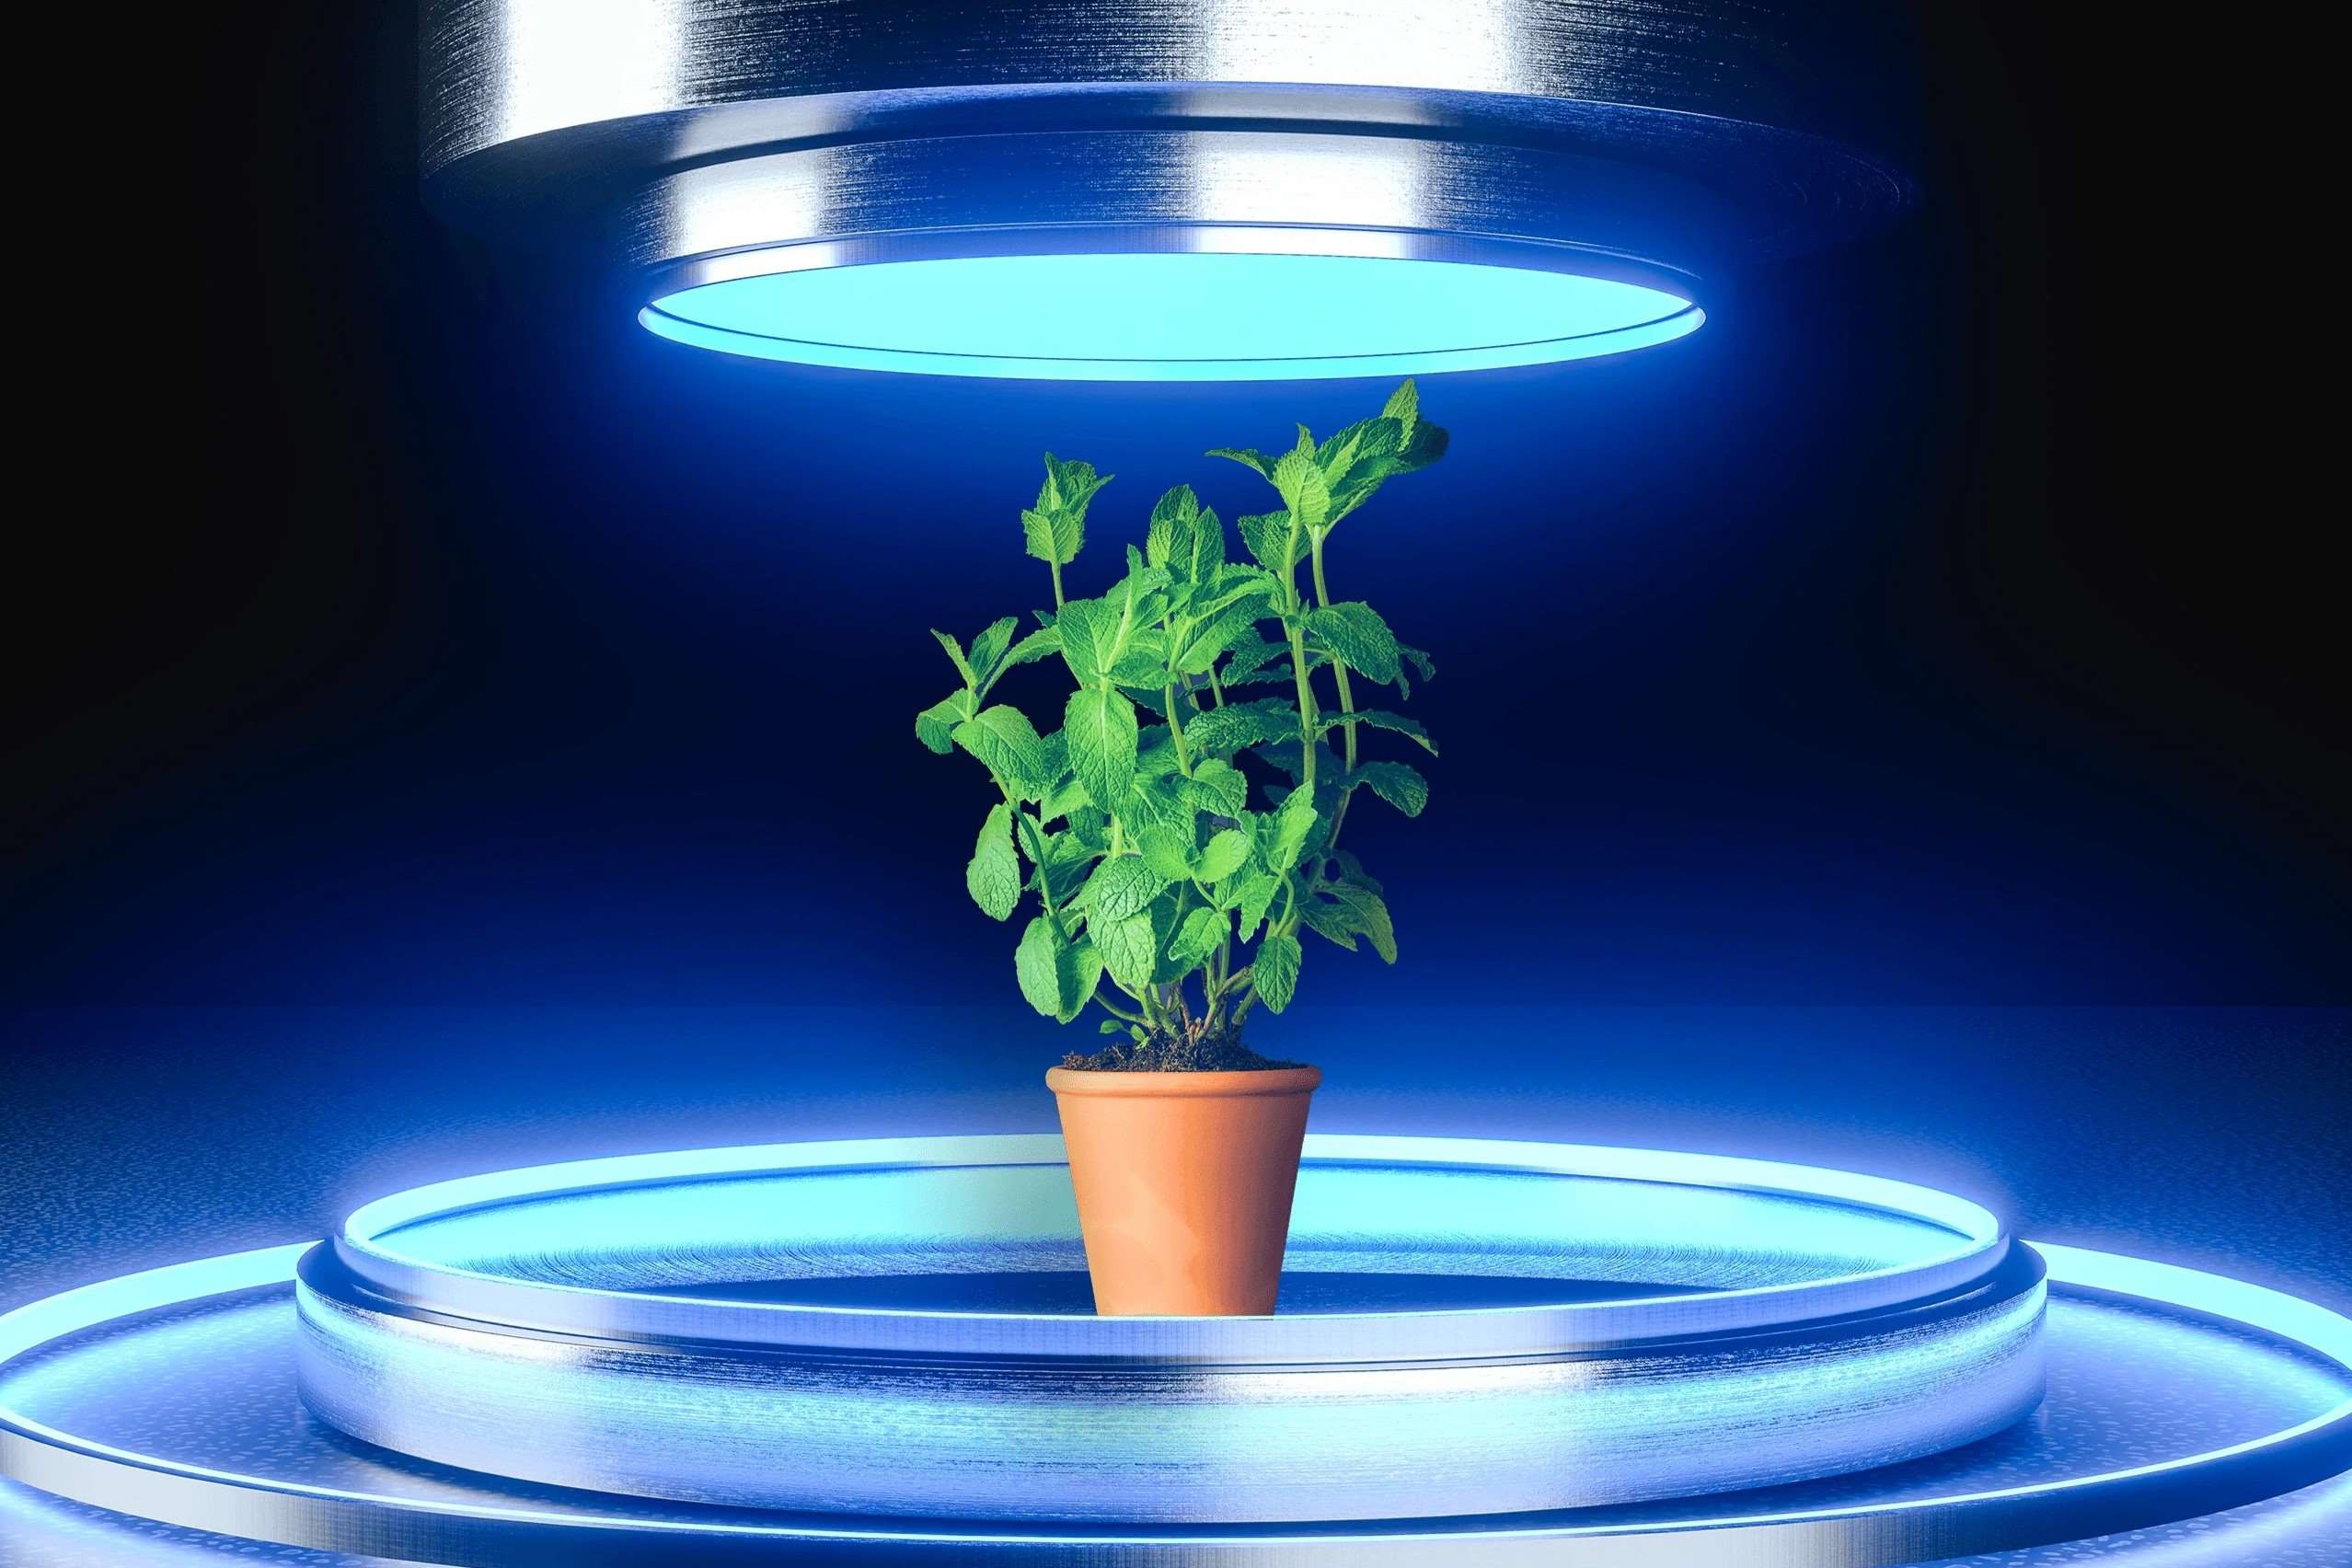 Plant Physiology: Understanding Why Plants Absorb Blue Light